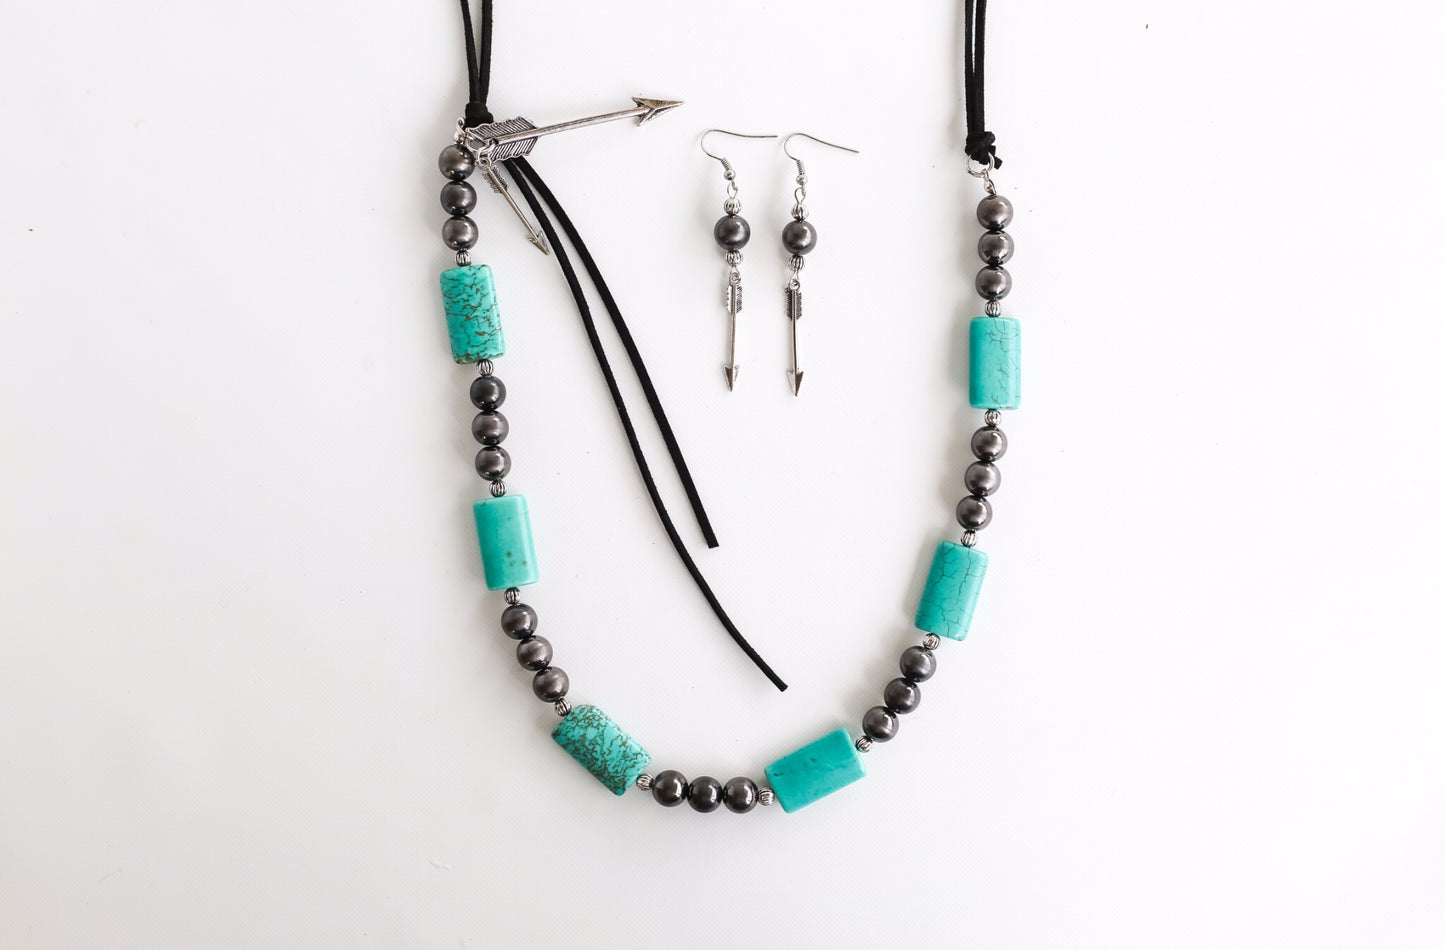 Black Leather Neck Set with Turquoise